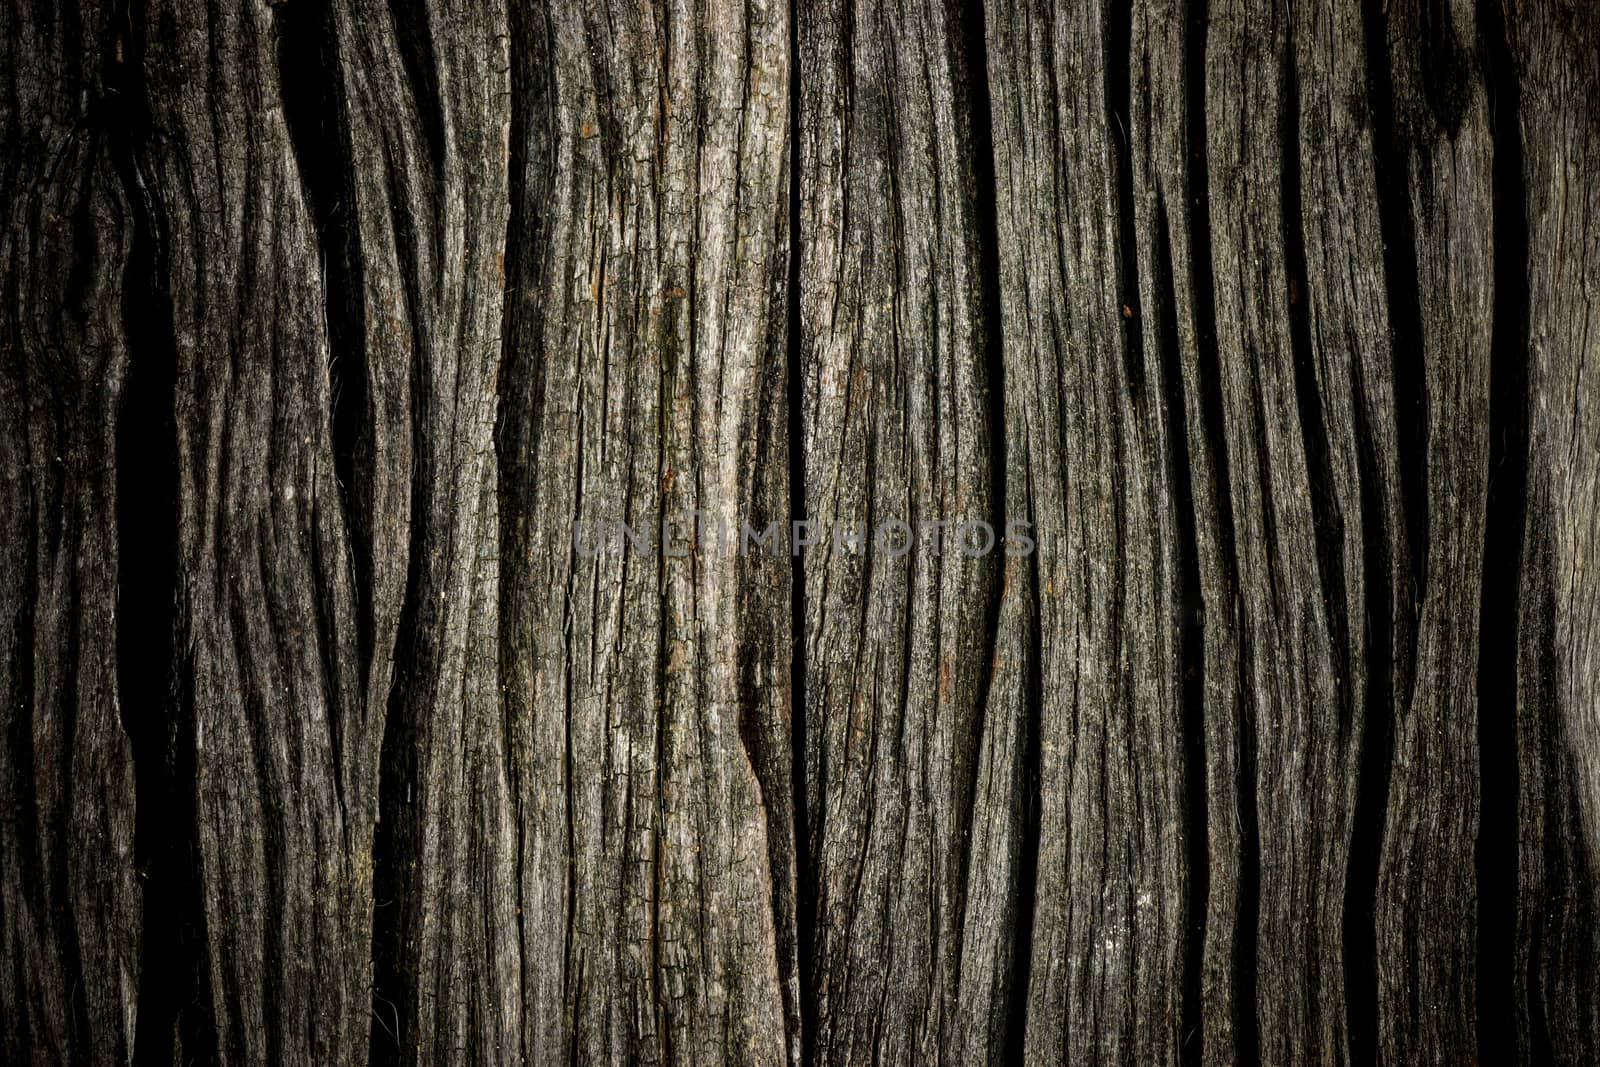 Detail of old wooden planks.